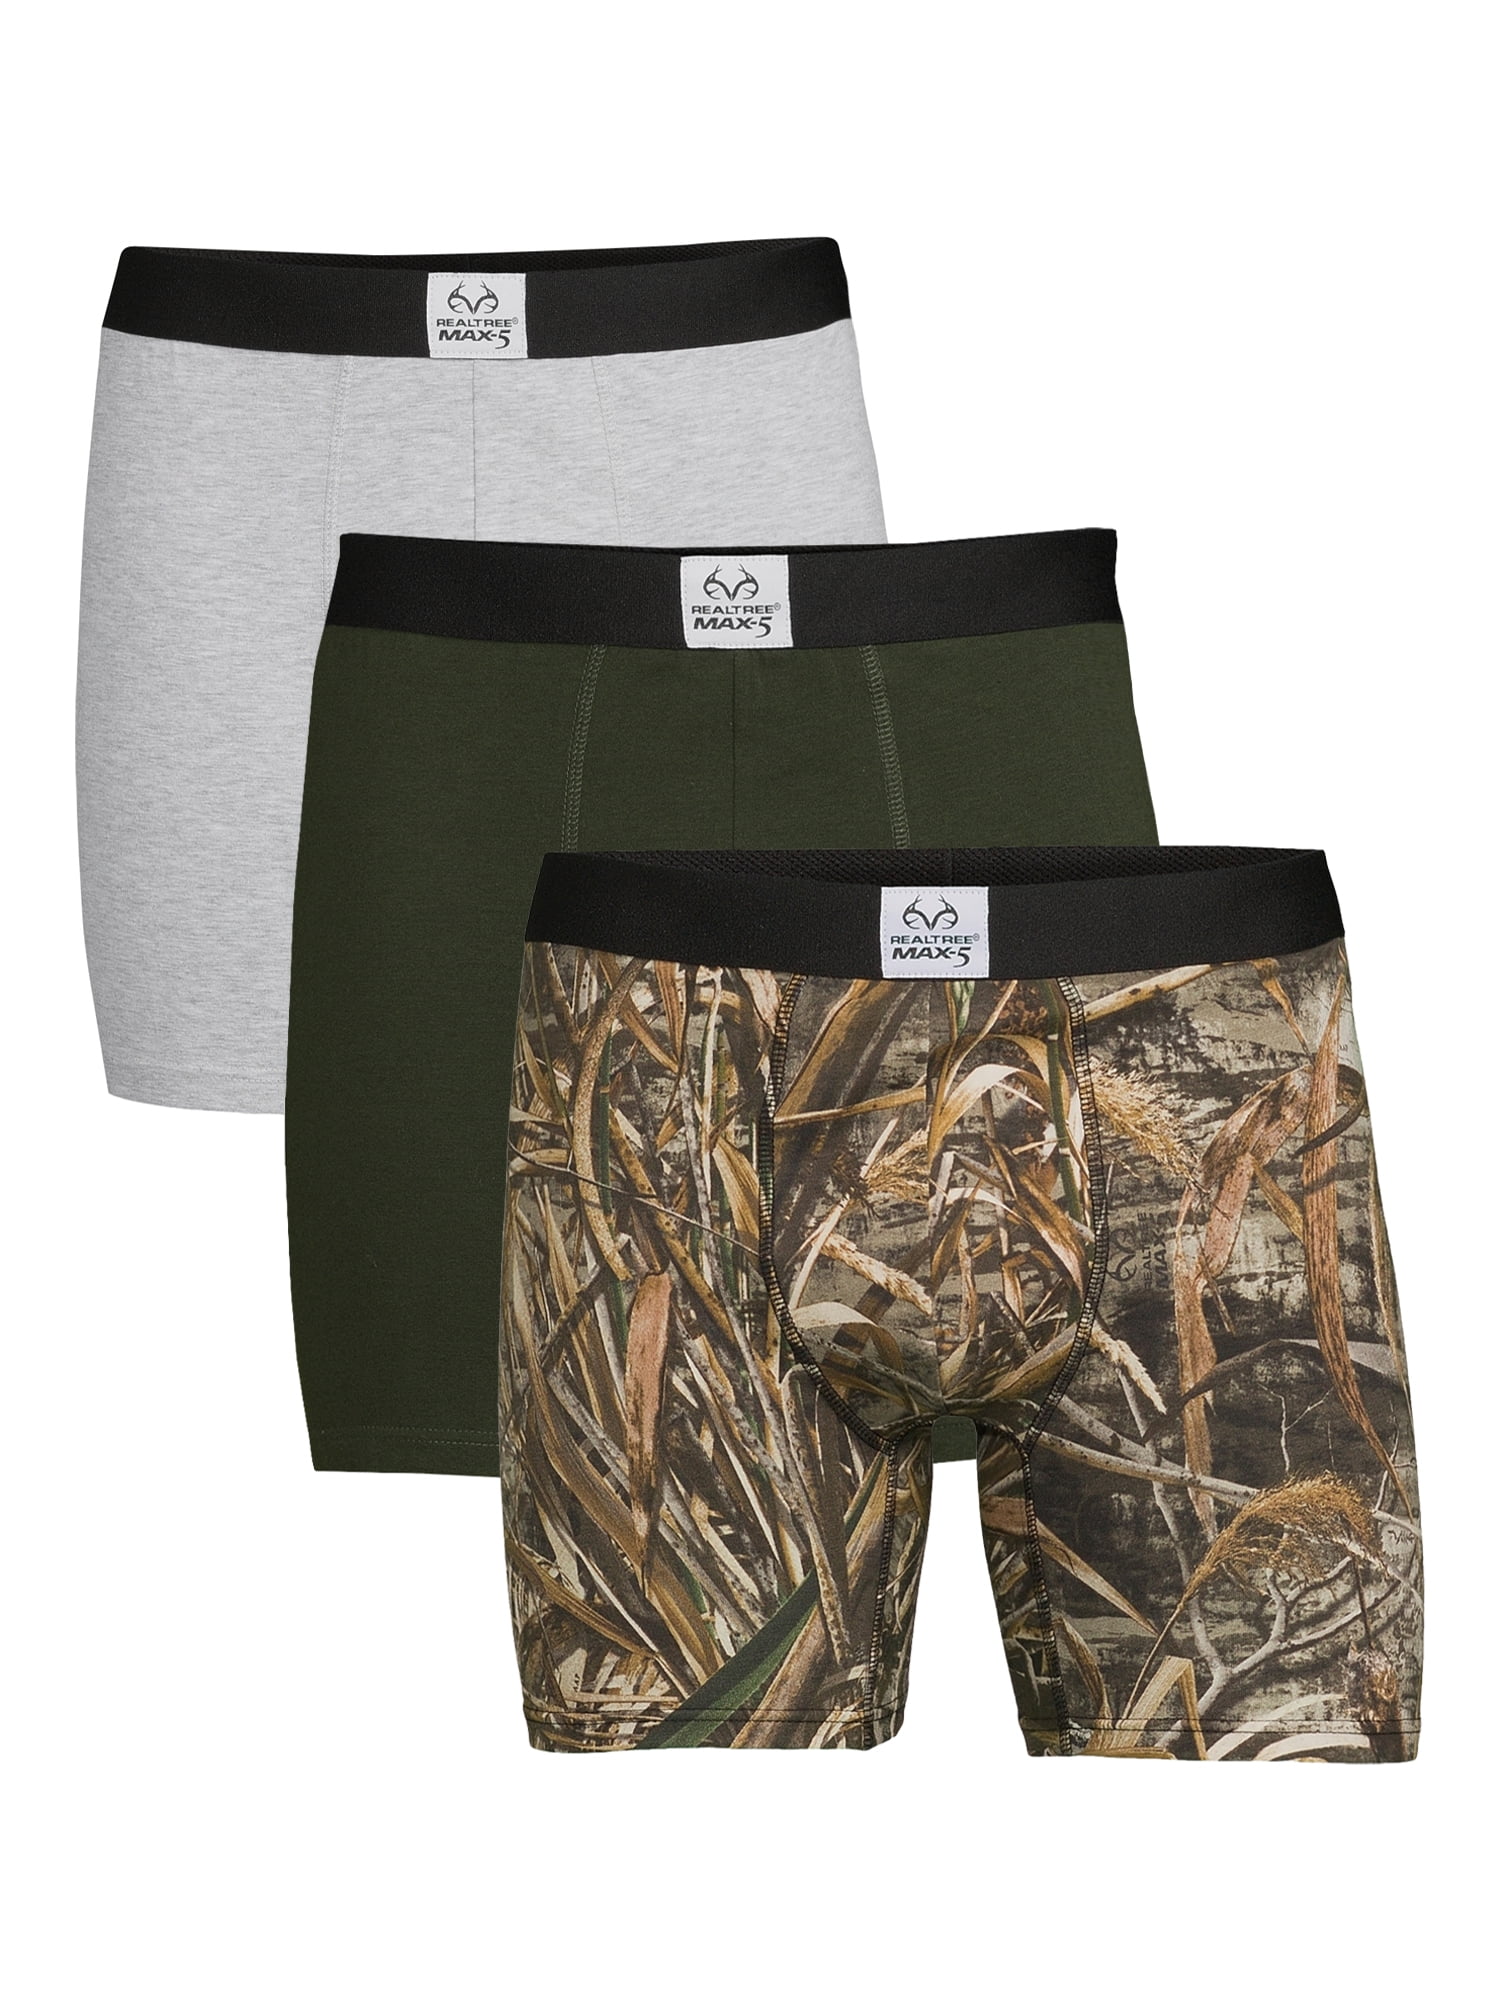 Realtree 3-Pack Adult Mens Cotton Stretch Boxer Briefs, Sizes S-XL